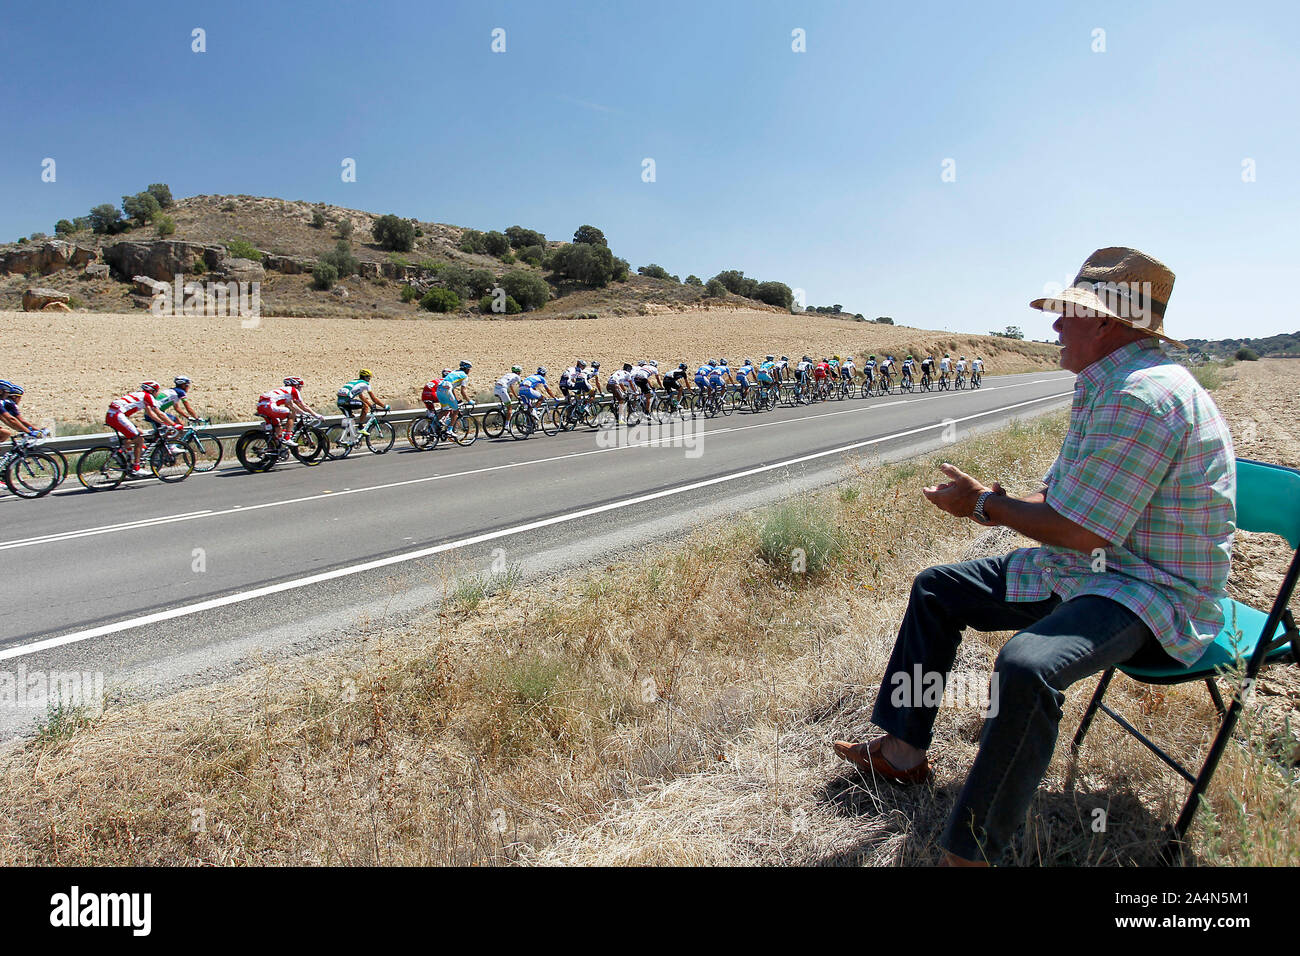 A fan of cycling greets riders in the peloton during the stage of La Vuelta 2012 between Huesca and Motorland Aragon (Alcaniz).August 24,2012. (ALTERP Stock Photo